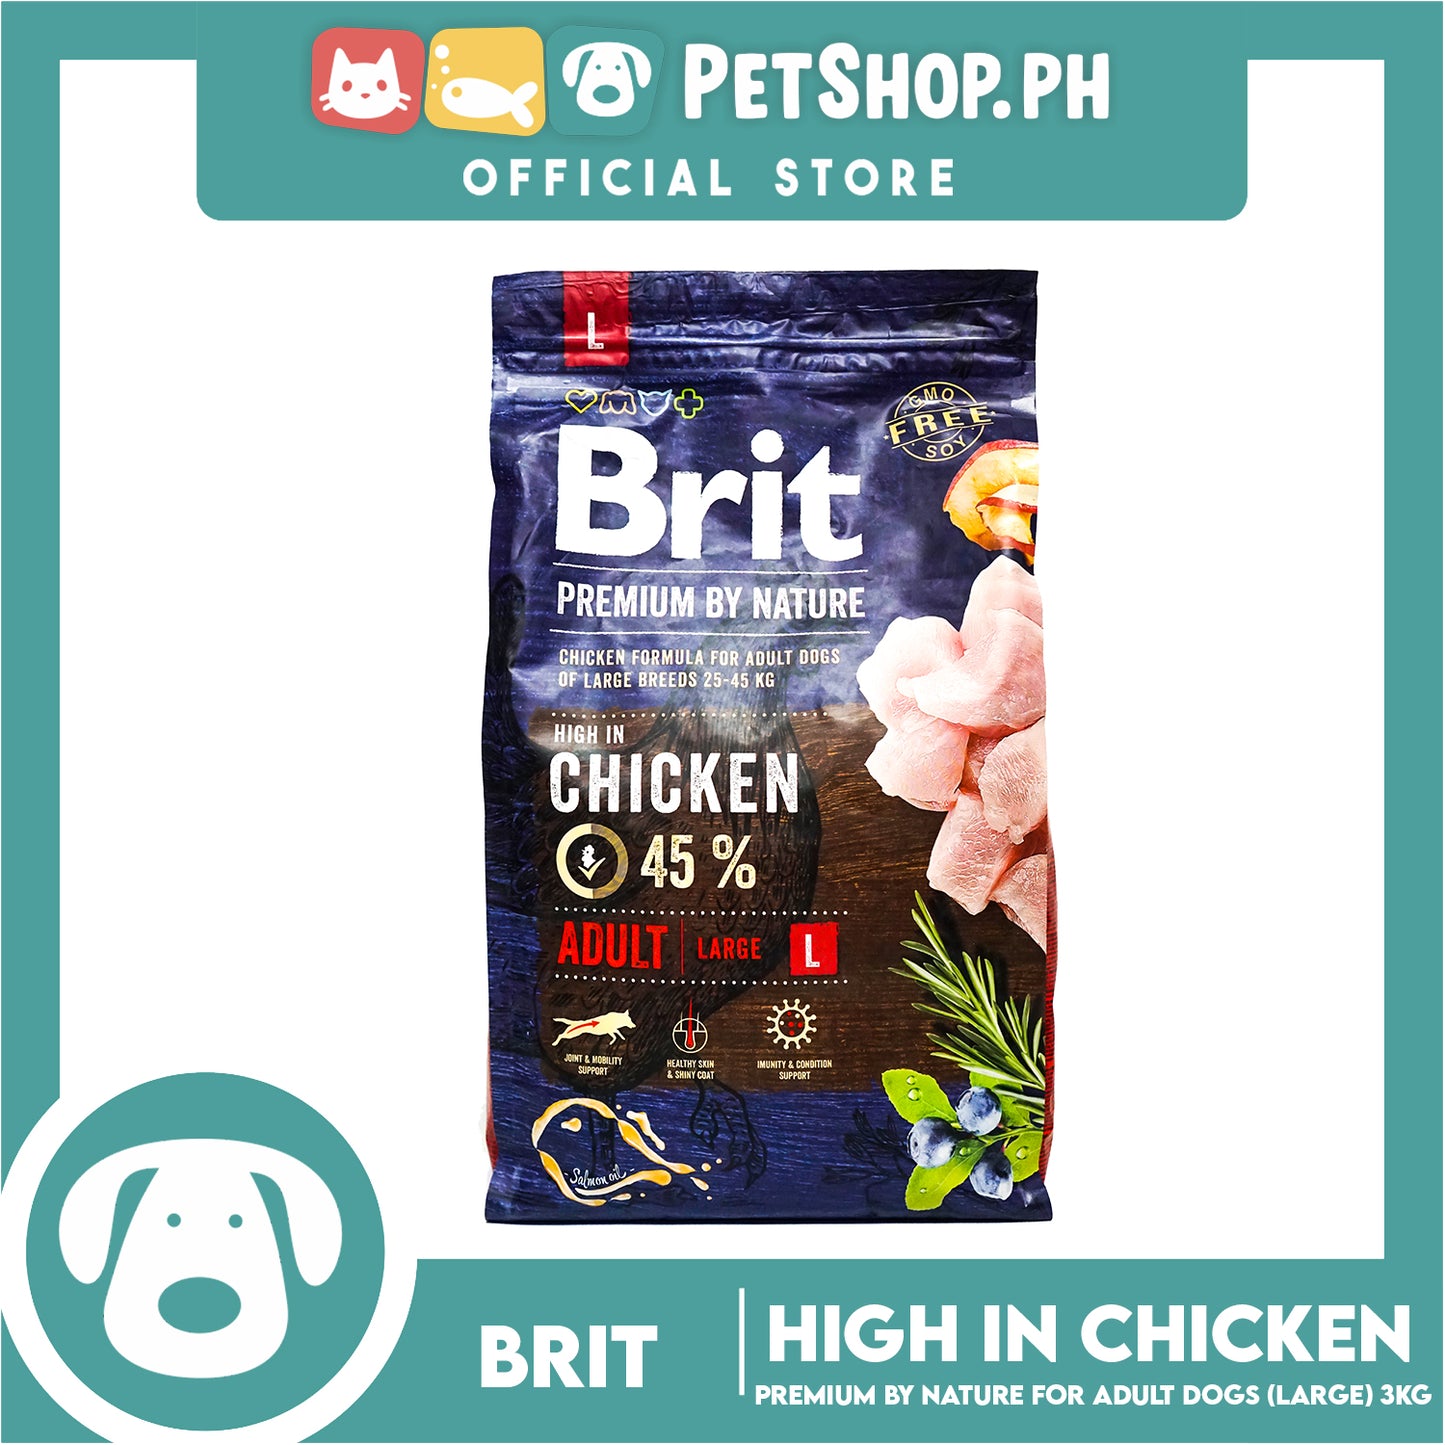 Brit Premium By Nature High in Chicken Adult Large 3kg Complete Chicken Formula Adult Dogs of Large Breeds